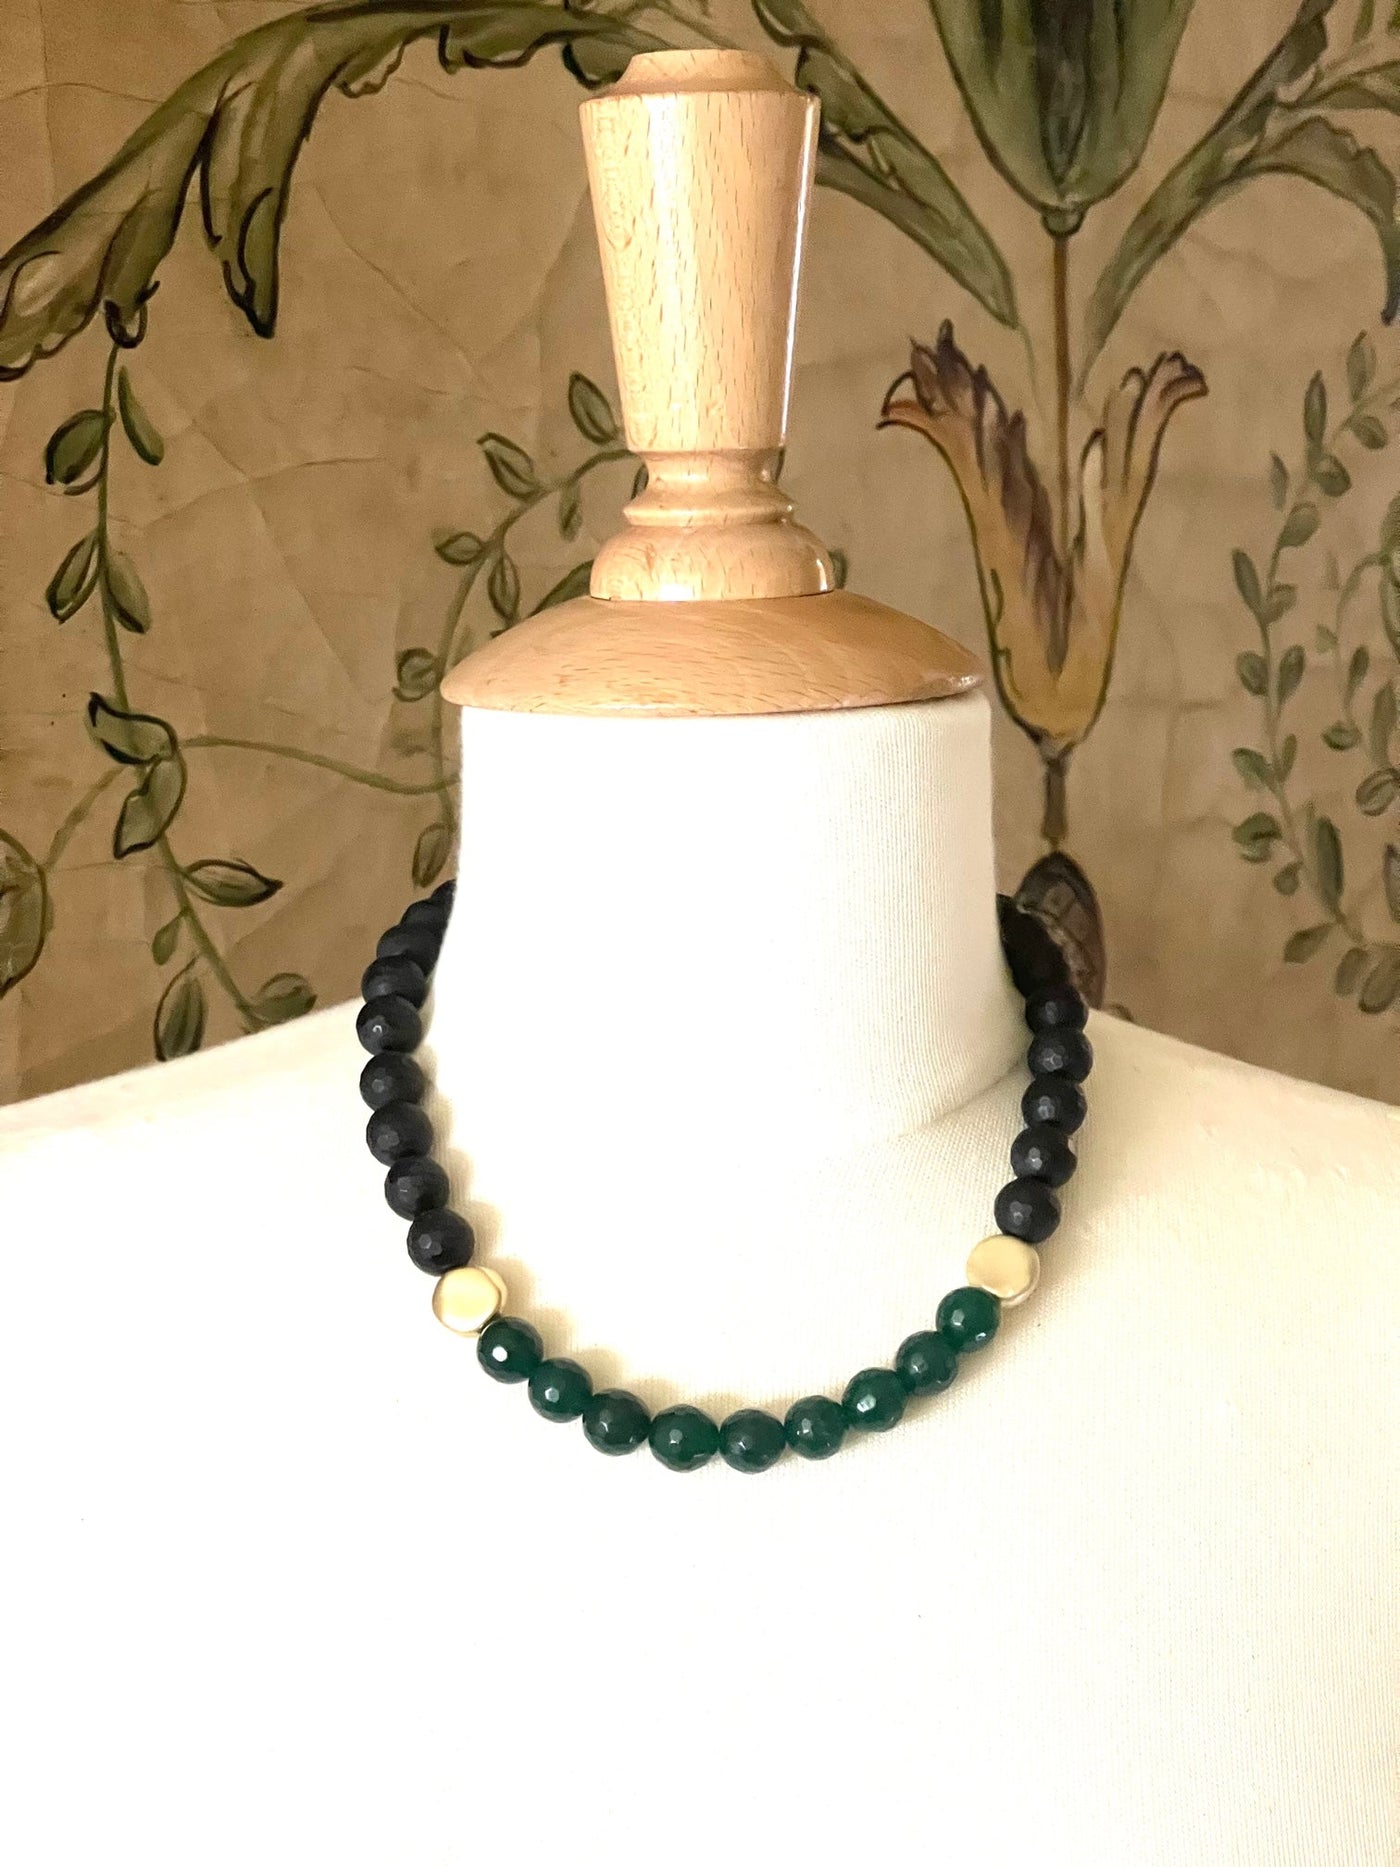 Matte Black Onyx And Green Jade Front Accent Necklace With Matte Gold Beads